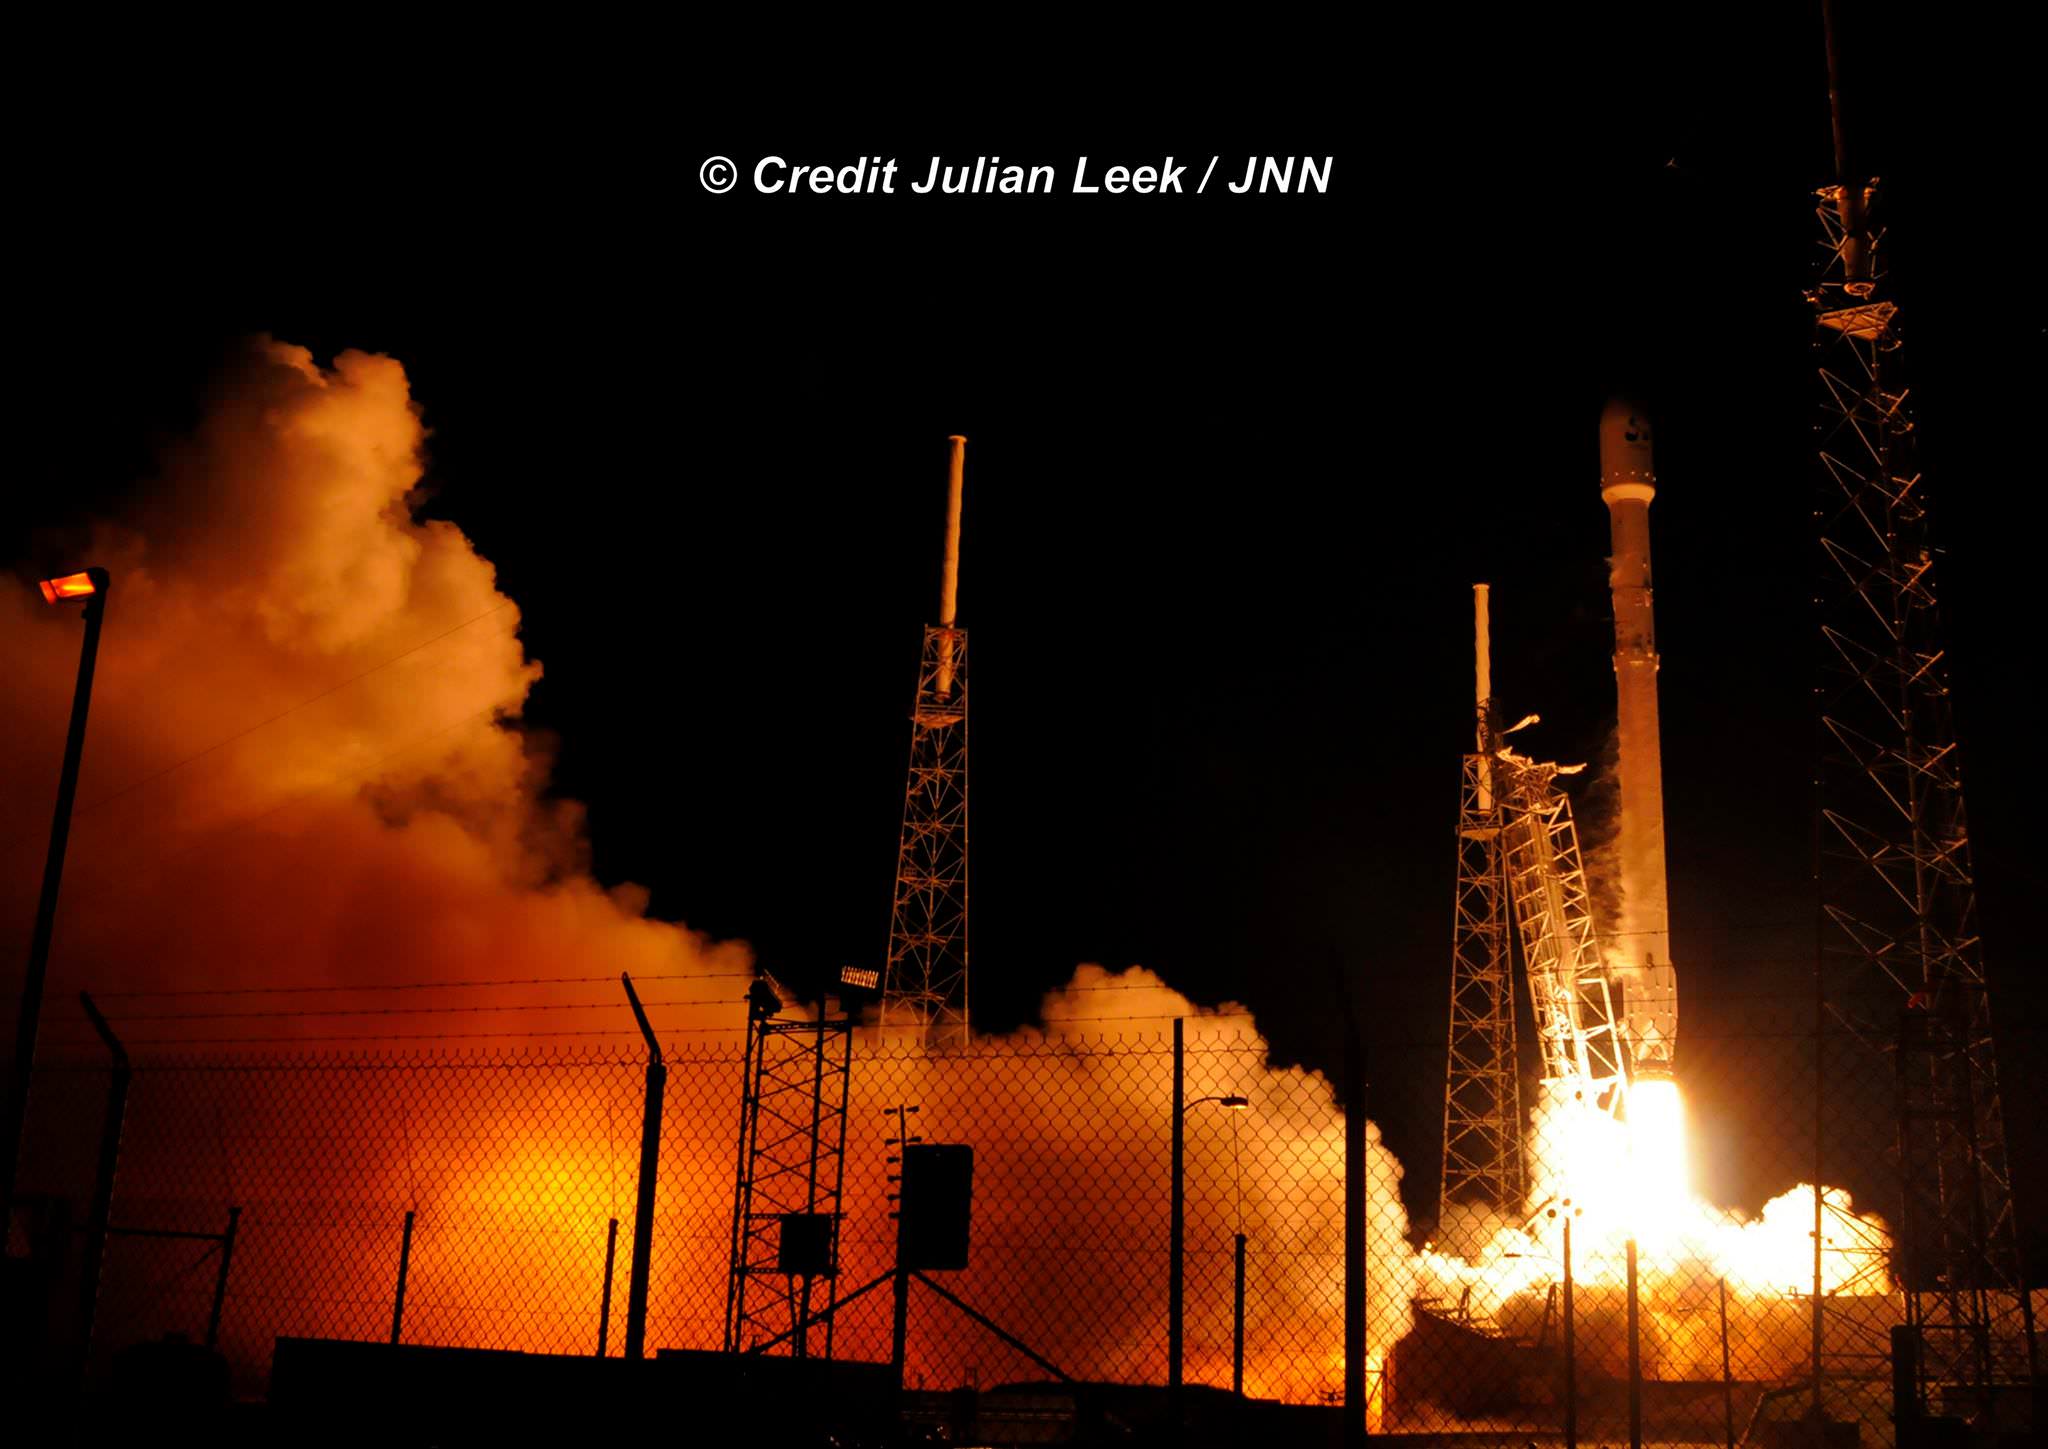 Launch of SpaceX Falcon 9 carrying JCSAT-14 Japanese communications satellite to orbit on May 6, 2016 at 1:21 a.m. EDT from Space Launch Complex 40 at Cape Canaveral Air Force Station, Fl.  Credit: Julian Leek  